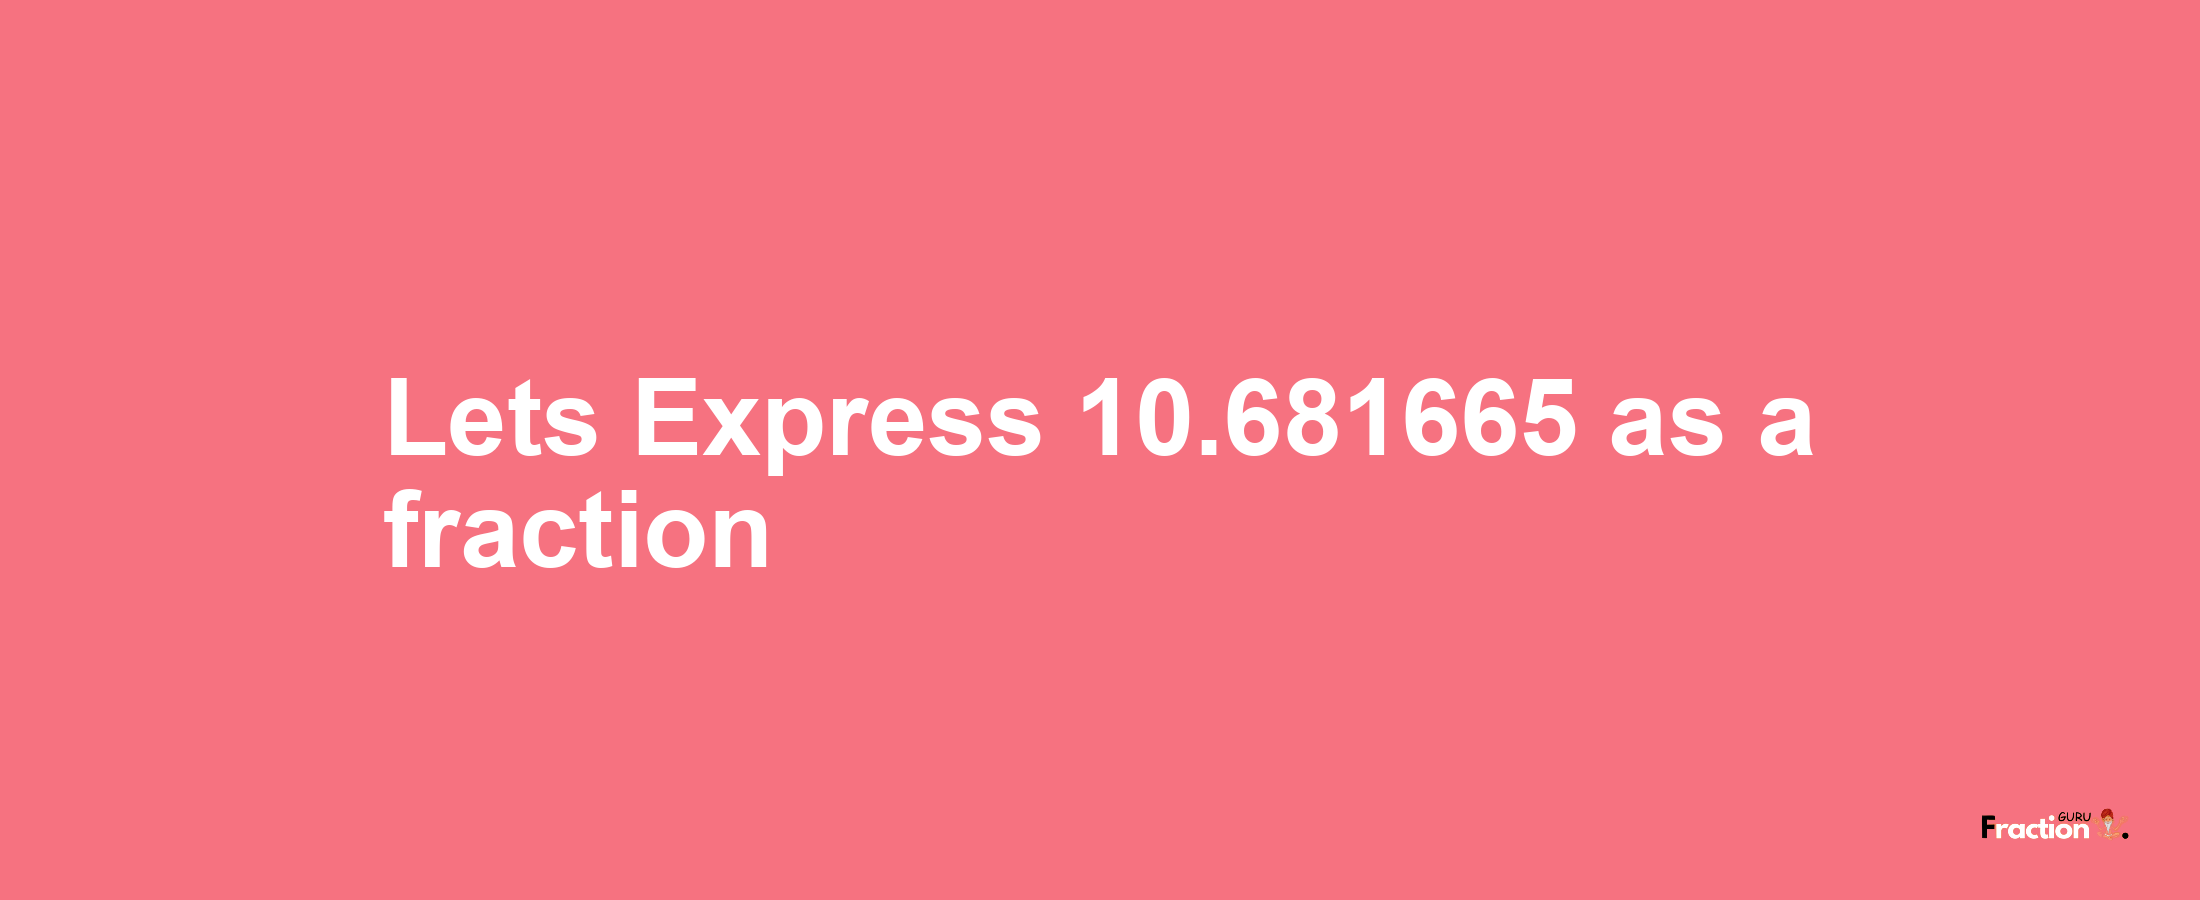 Lets Express 10.681665 as afraction